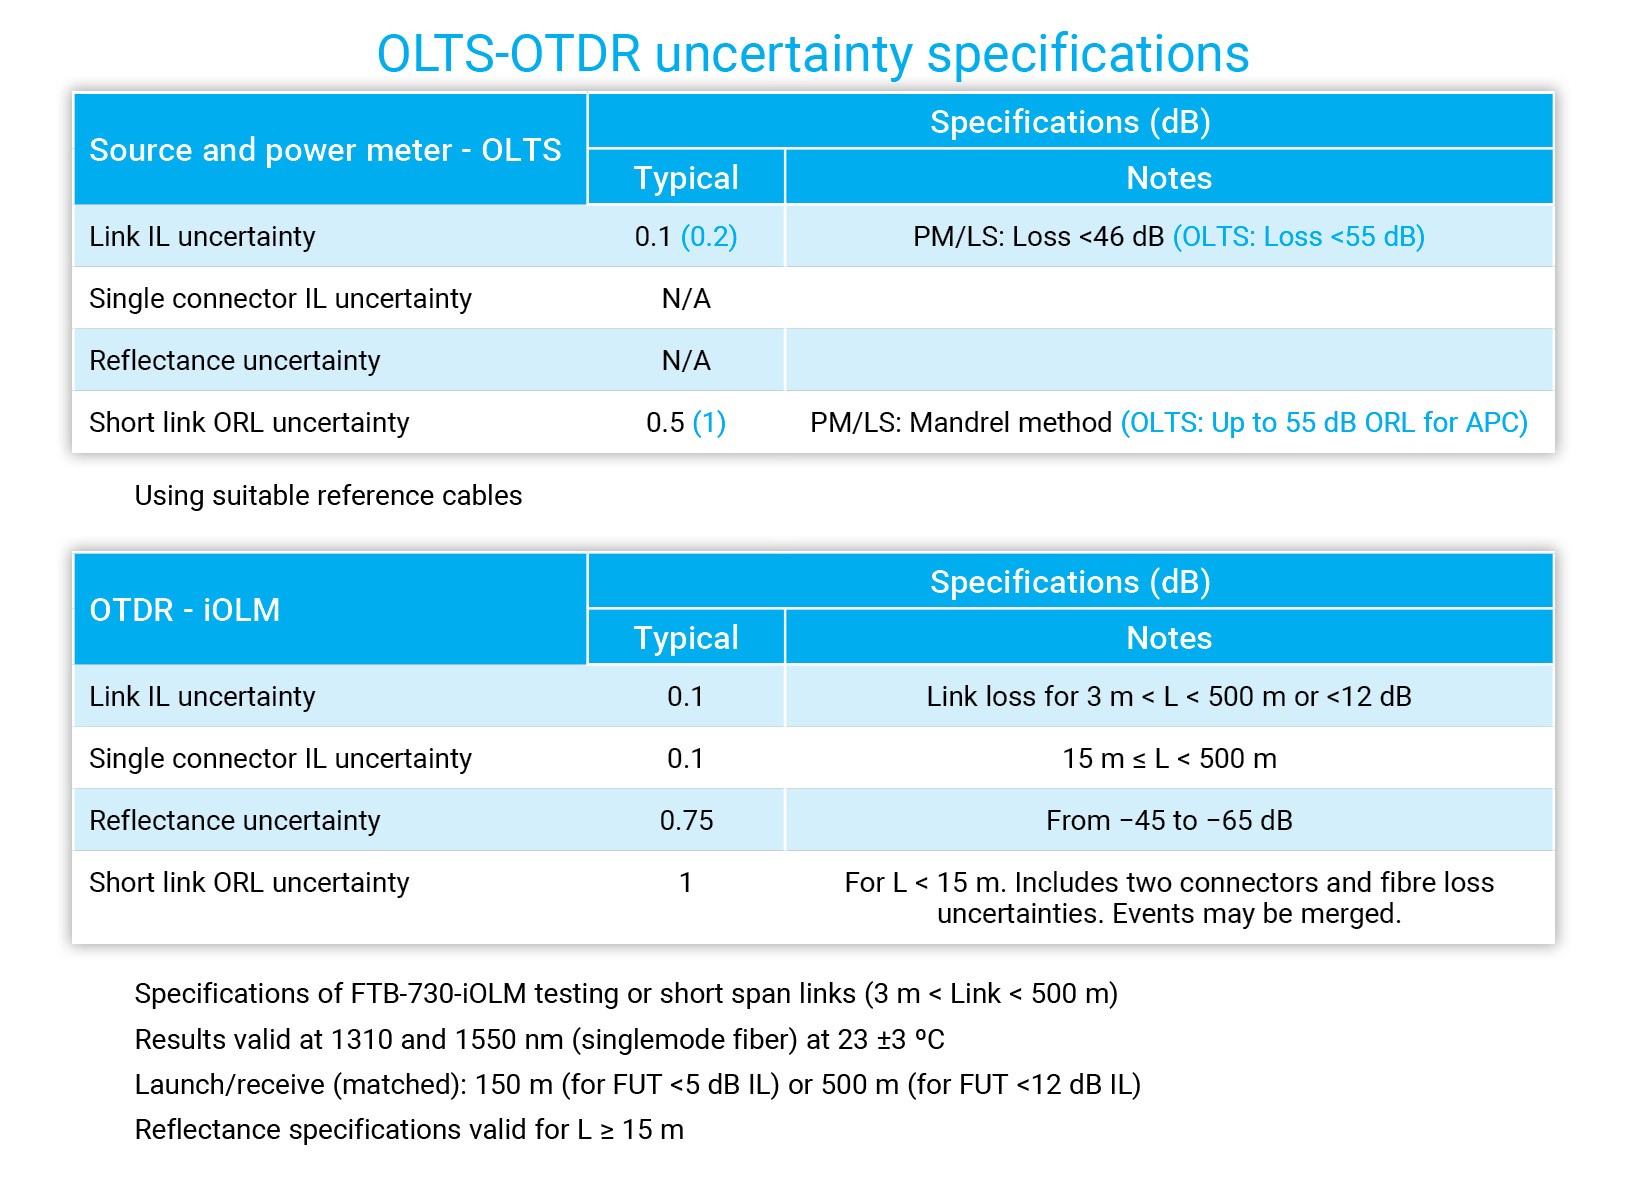 OLTS and OTDR uncertainty specifications